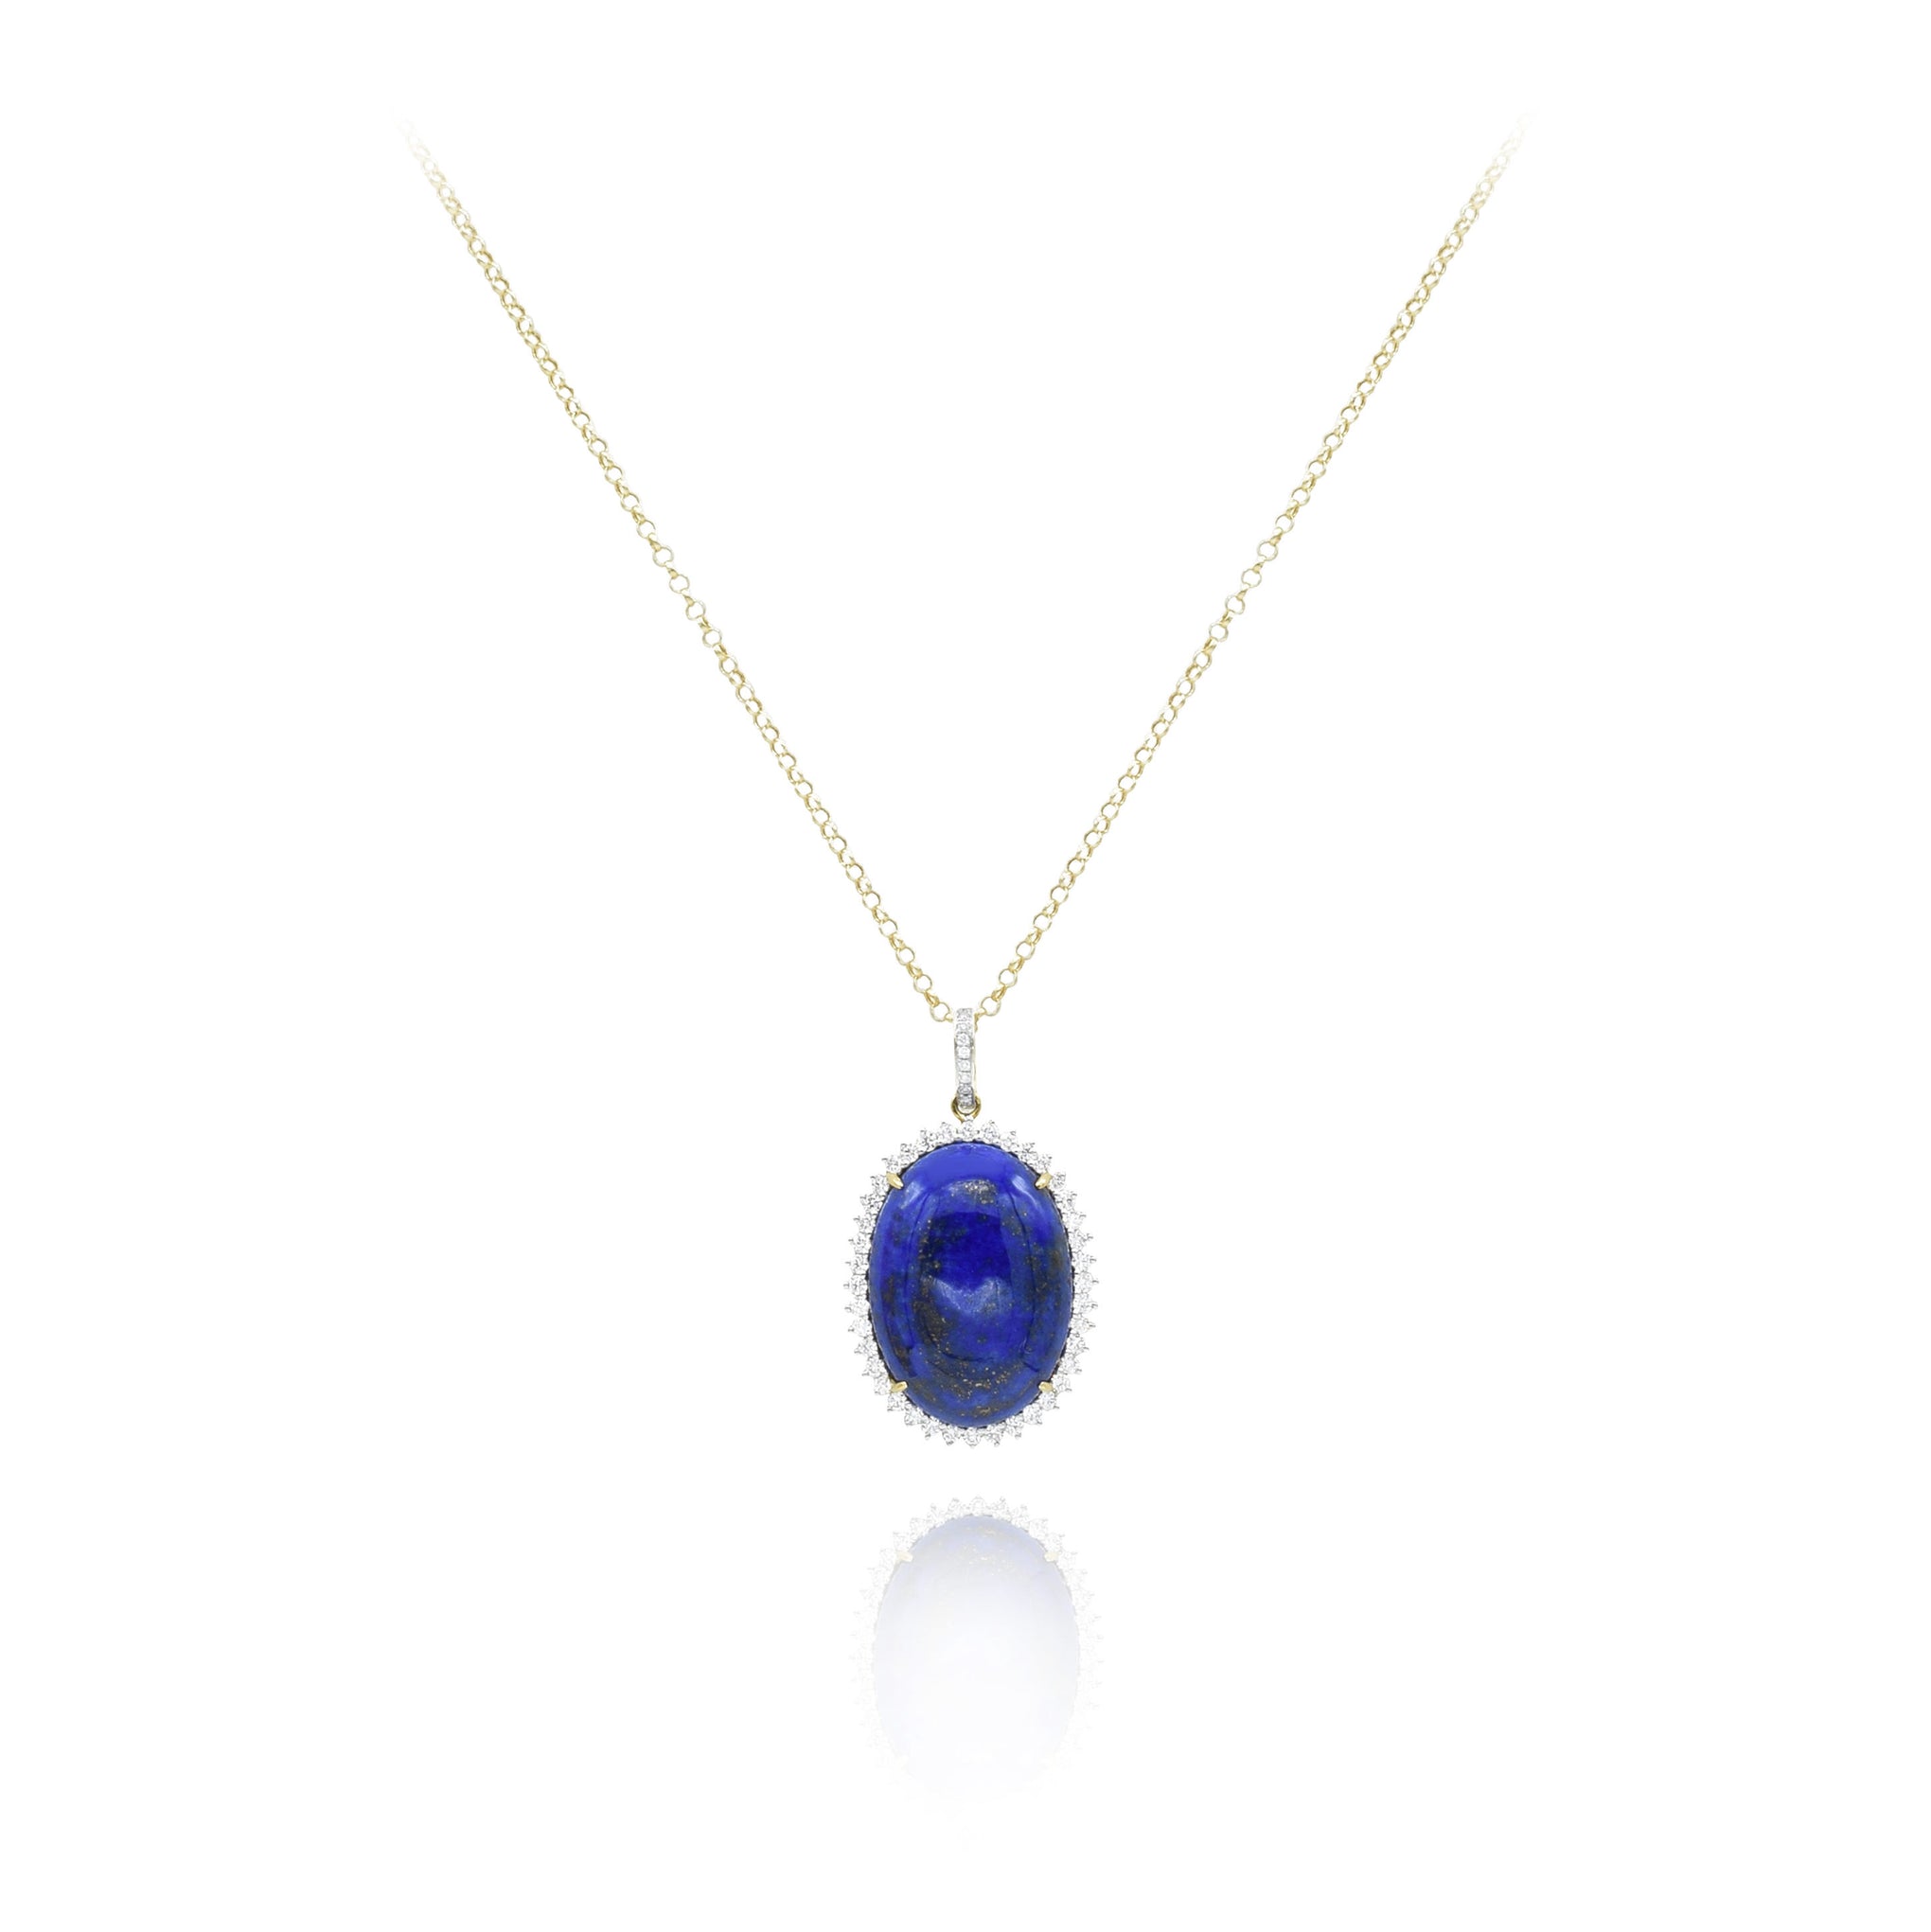 Diamond and Lapis Pendant Set in 18kt Yellow Gold